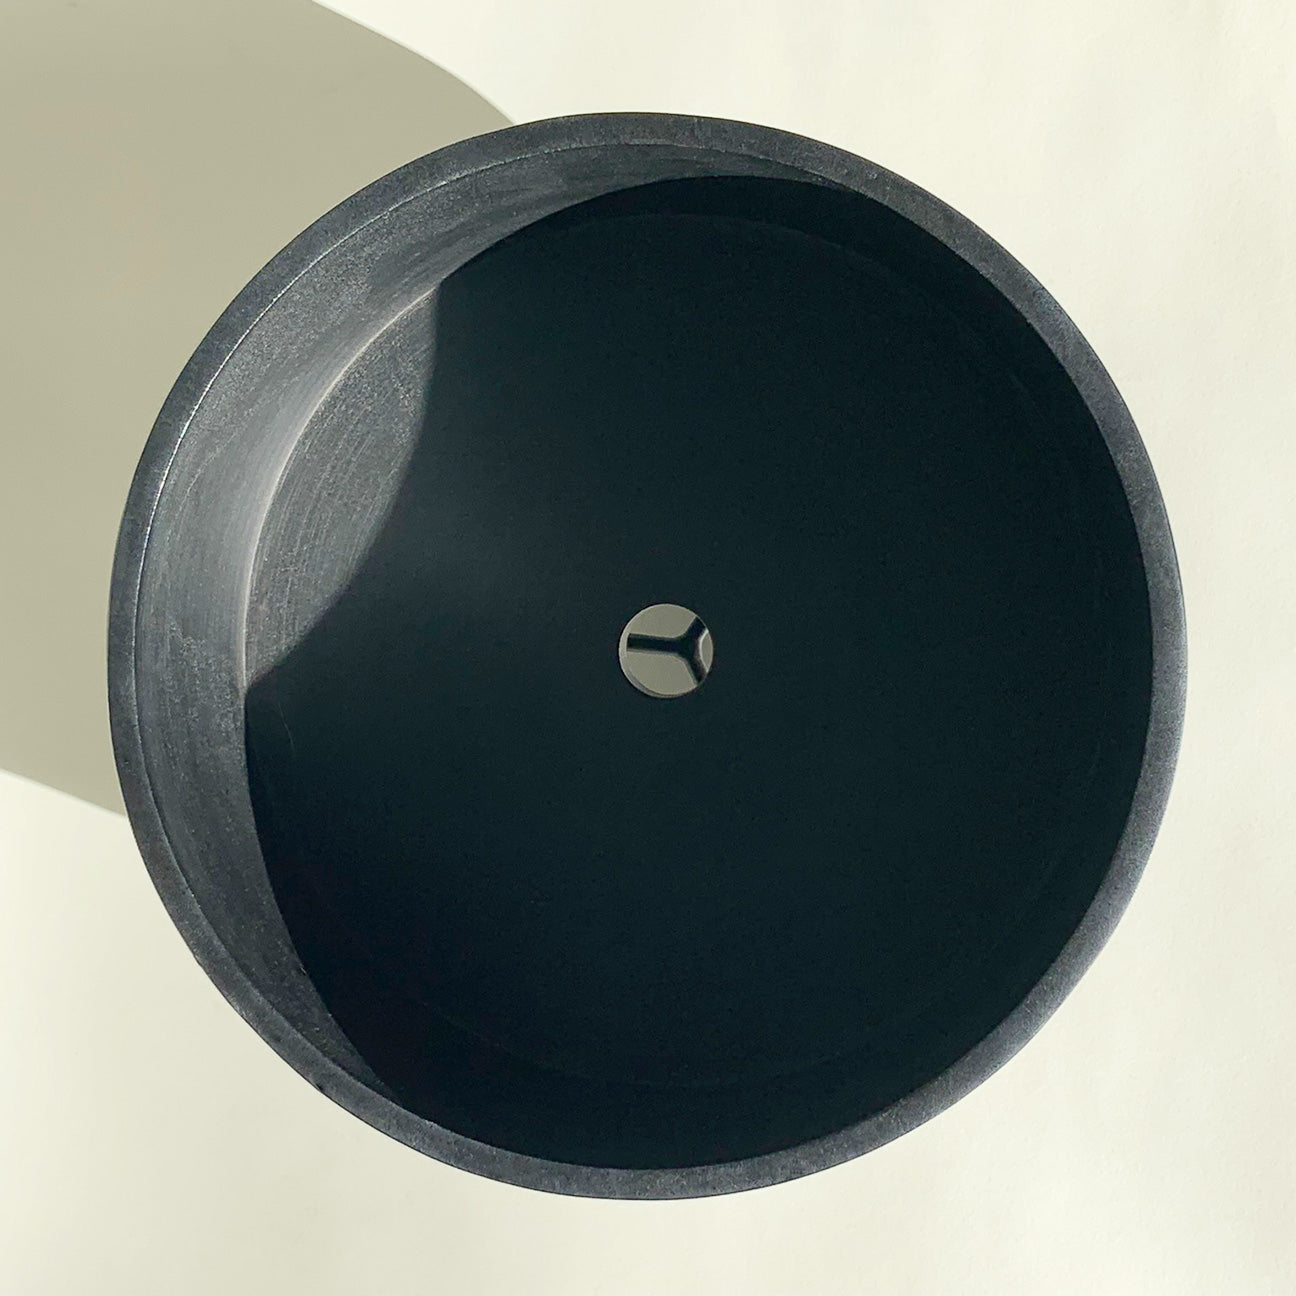 Top view of M+A NYC Low Cylindrical Planter that is 8 1/8" in diameter, made of black soapstone with a low luster waxed finish, on a black powder coated brass stand.